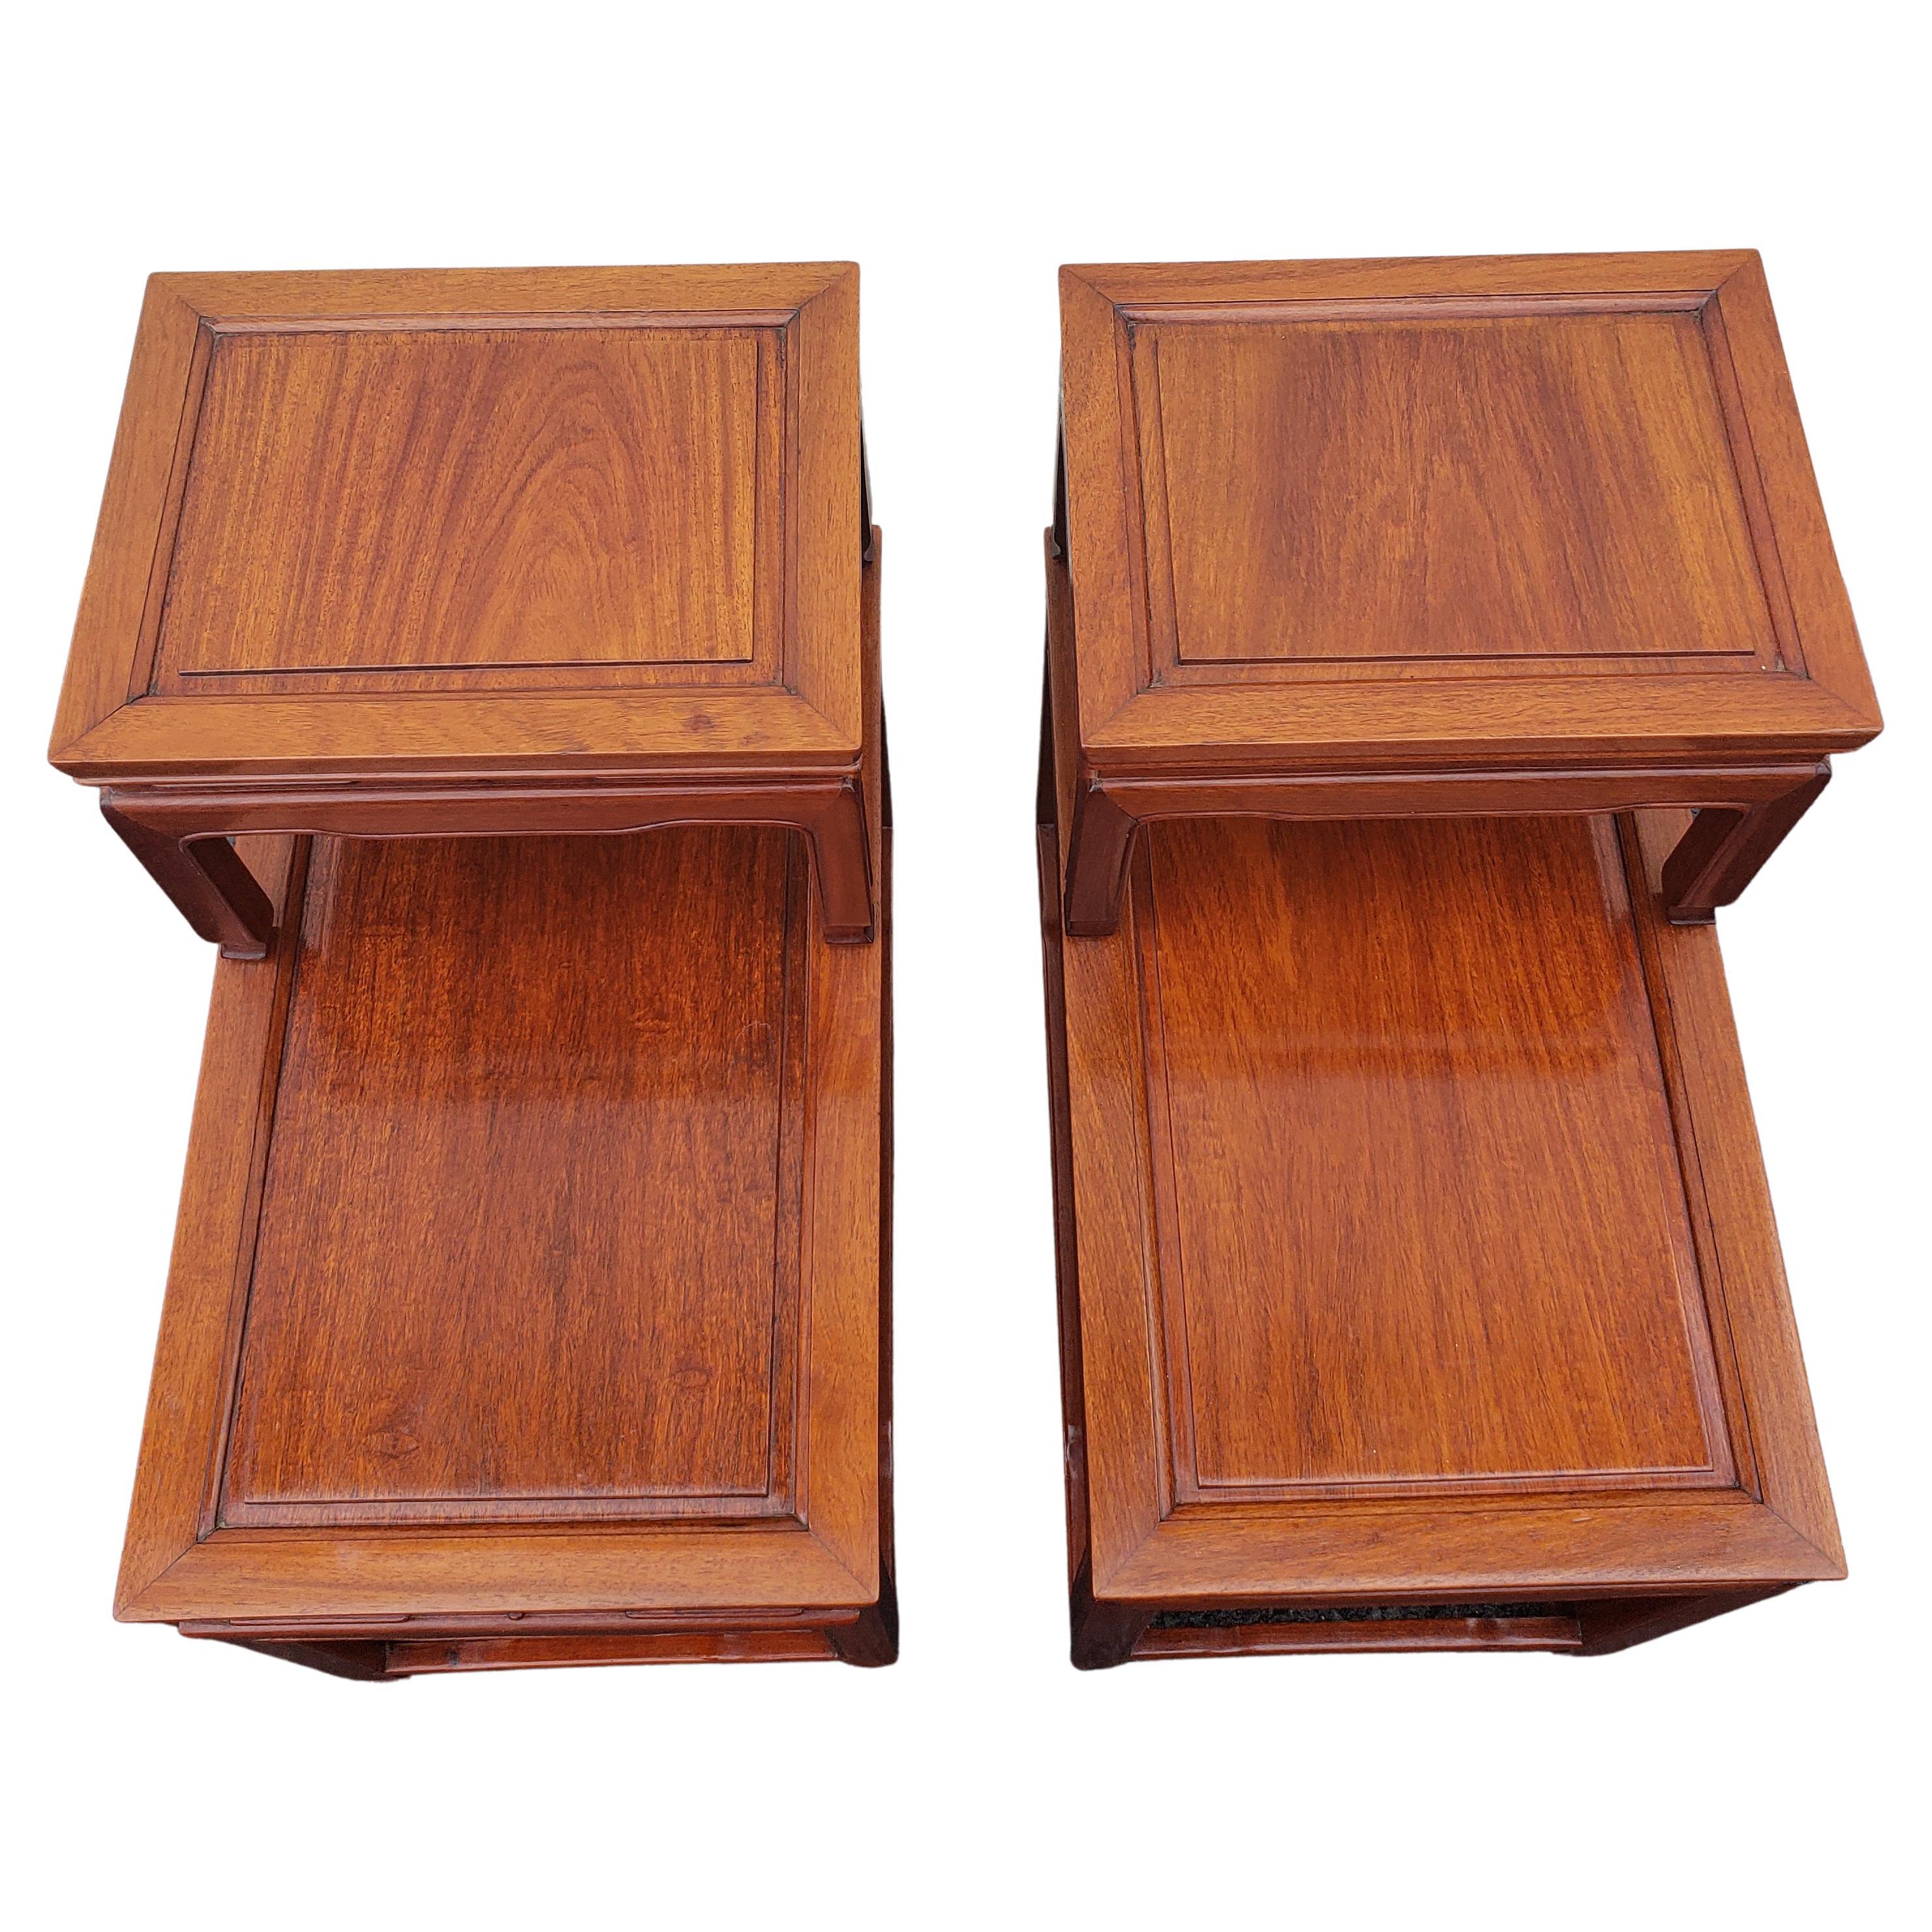 20th Century George Zee Ming Style Carved Rosewood One Drawer 2 Tier End Tables, Circa 1960s